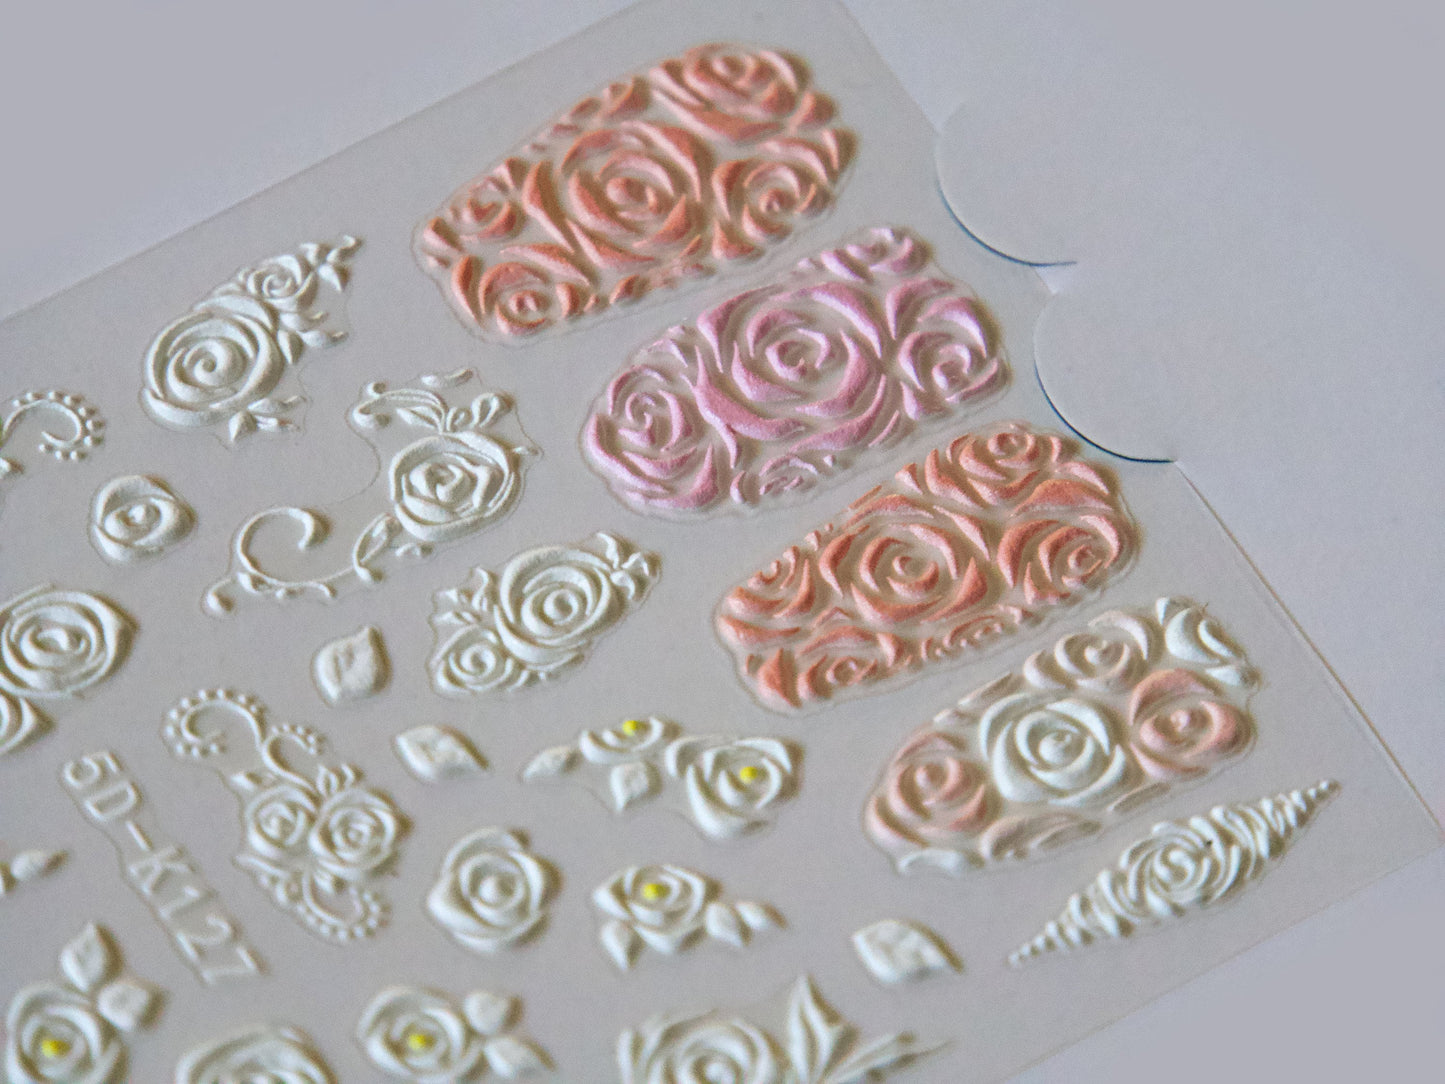 5D Carved Embossing Rose Nail Art Stickers Decals/ Bridal Pink White 3D Textured Floral Sticker/ Elegant Romantic Peel off Easy Manicure